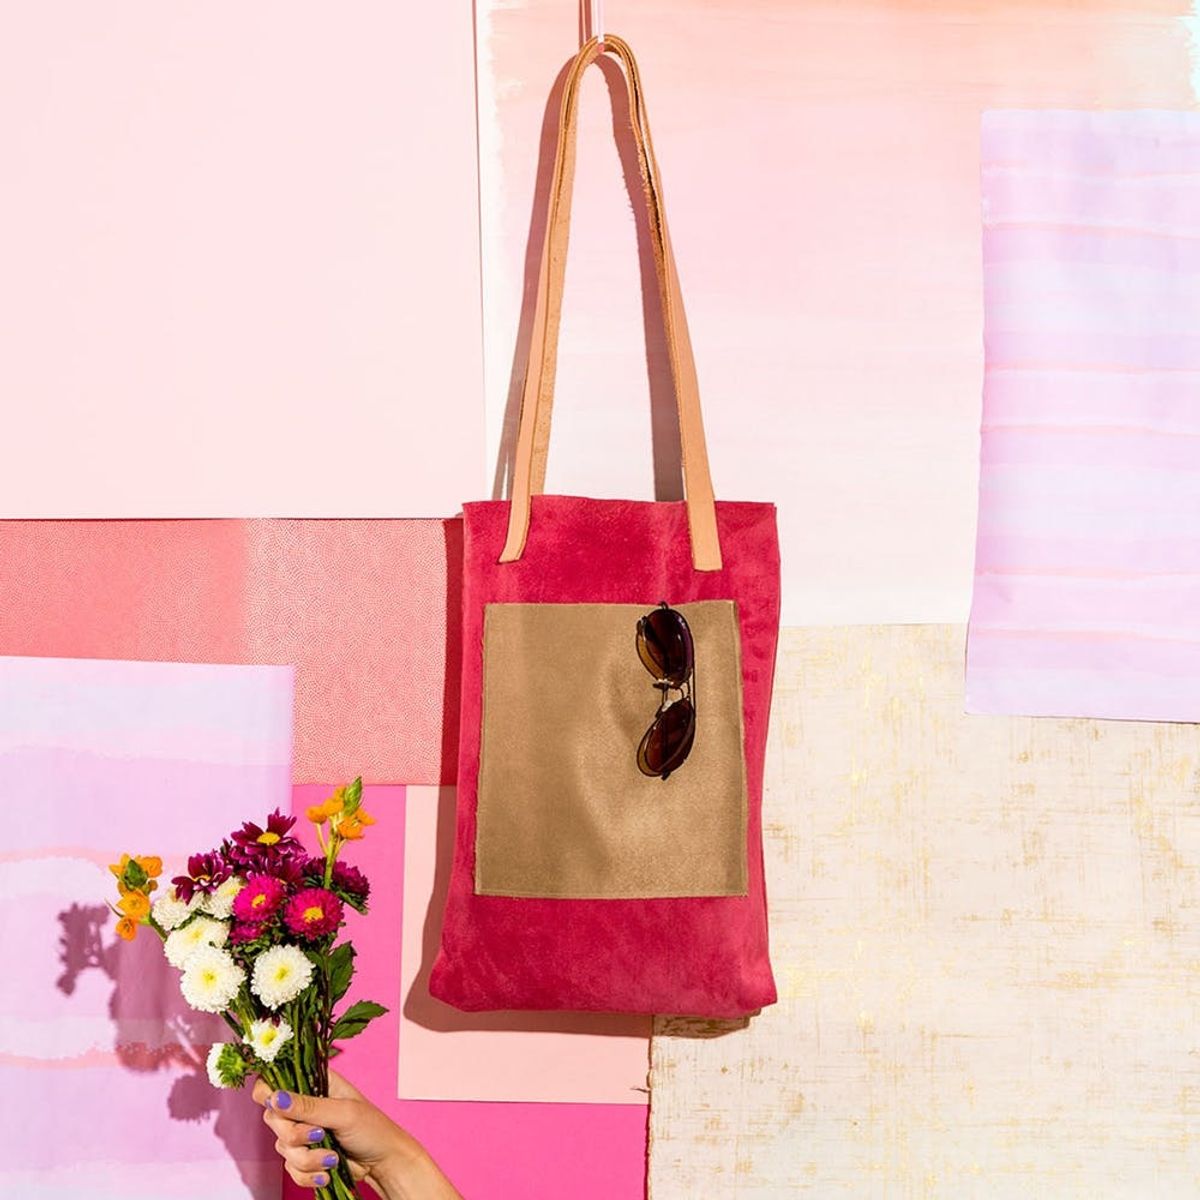 Keep Up With Runway Trends With This DIY Suede Patch Bag